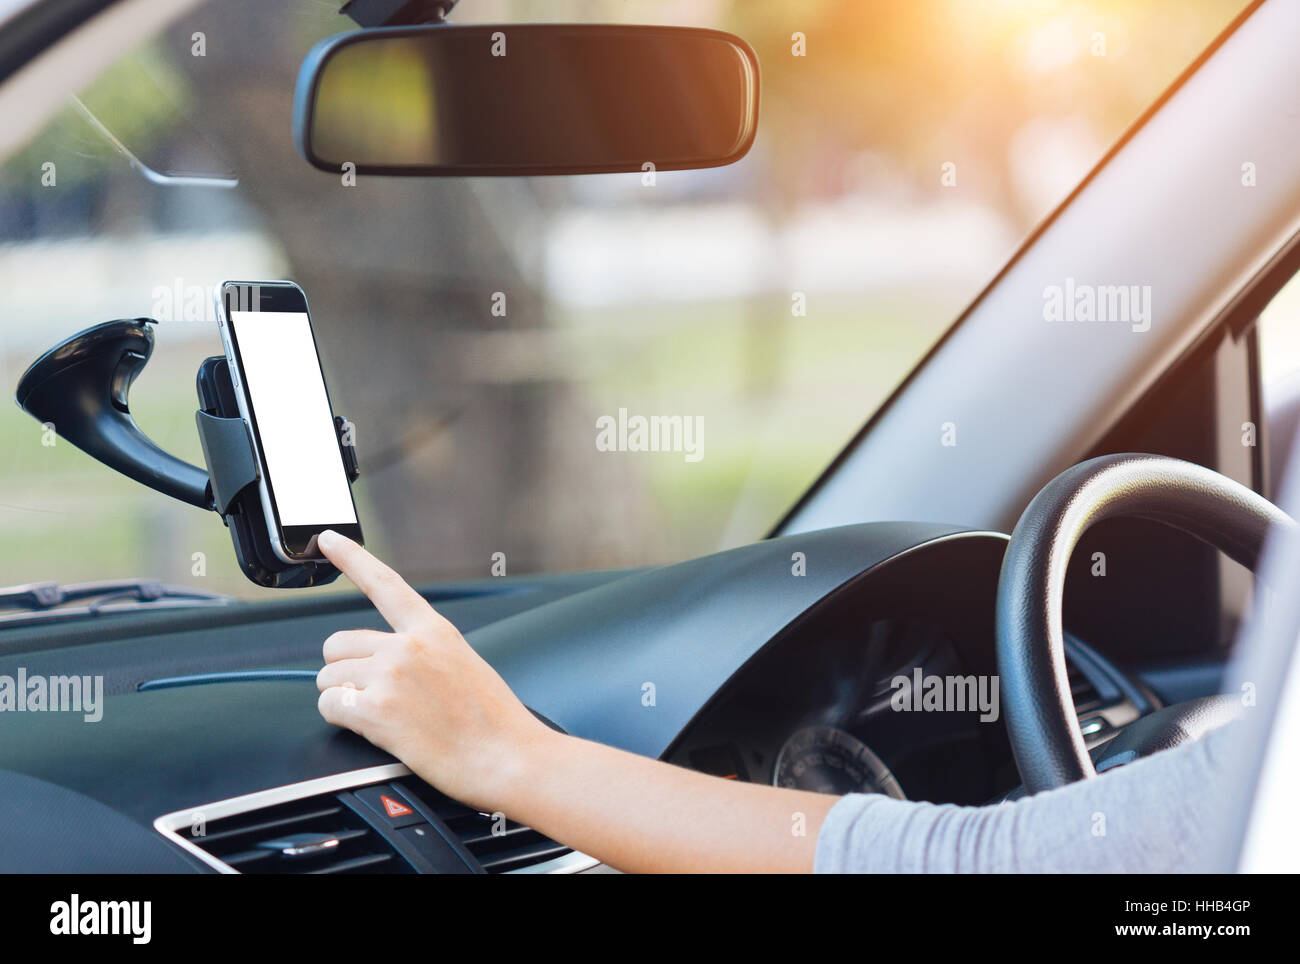 hand touching on phone mobile white screen in car Stock Photo